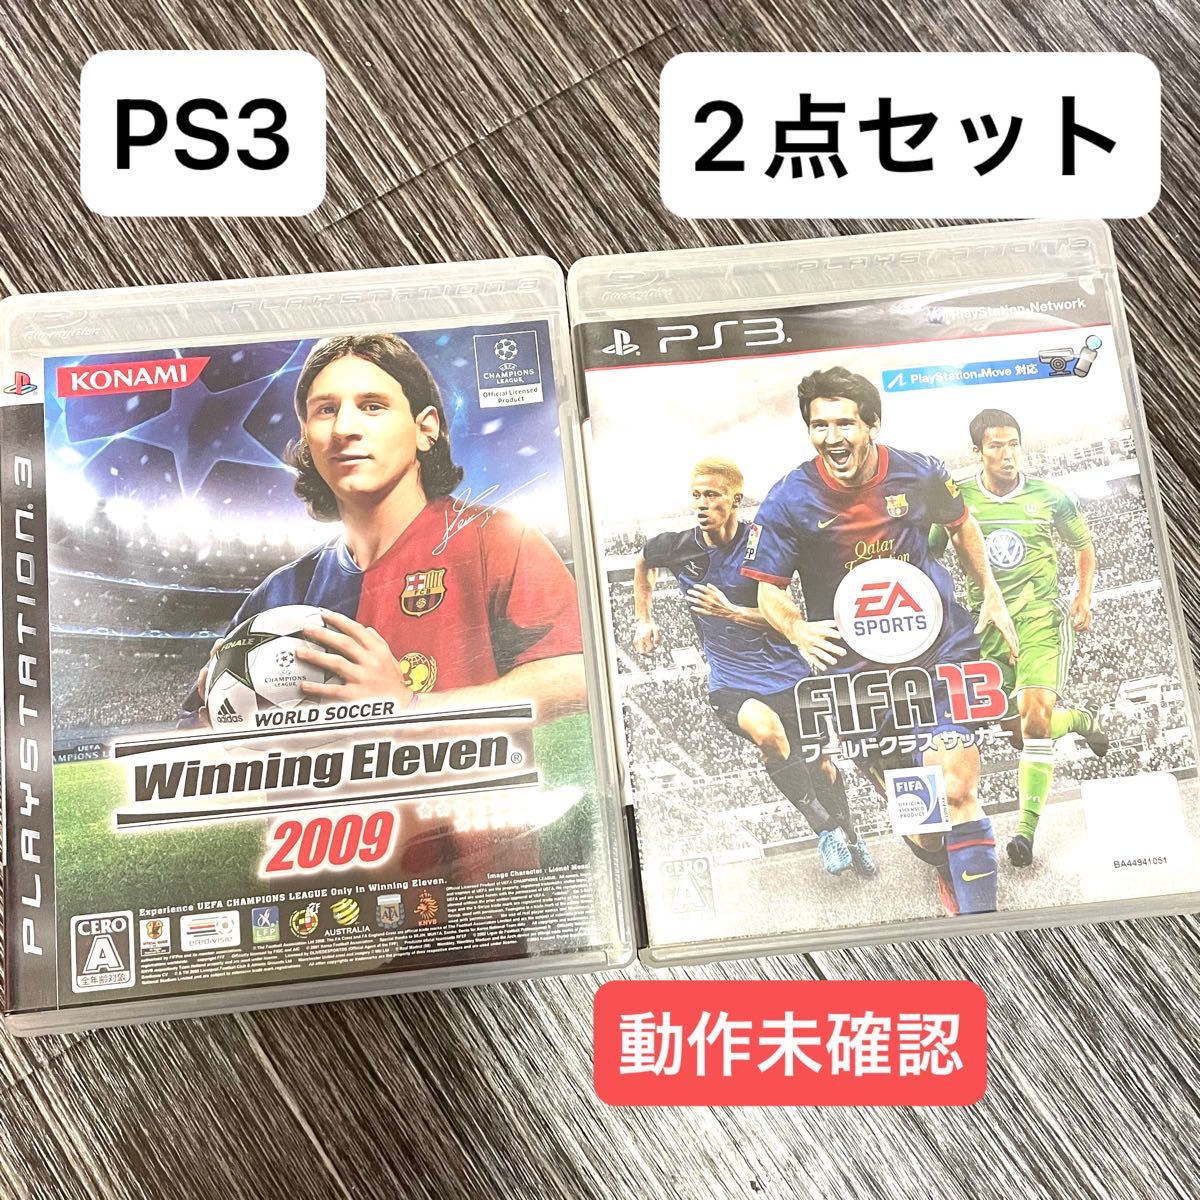 PS3 ソフト 2点セット ディスク綺麗です サッカー ゲームソフト｜Yahoo